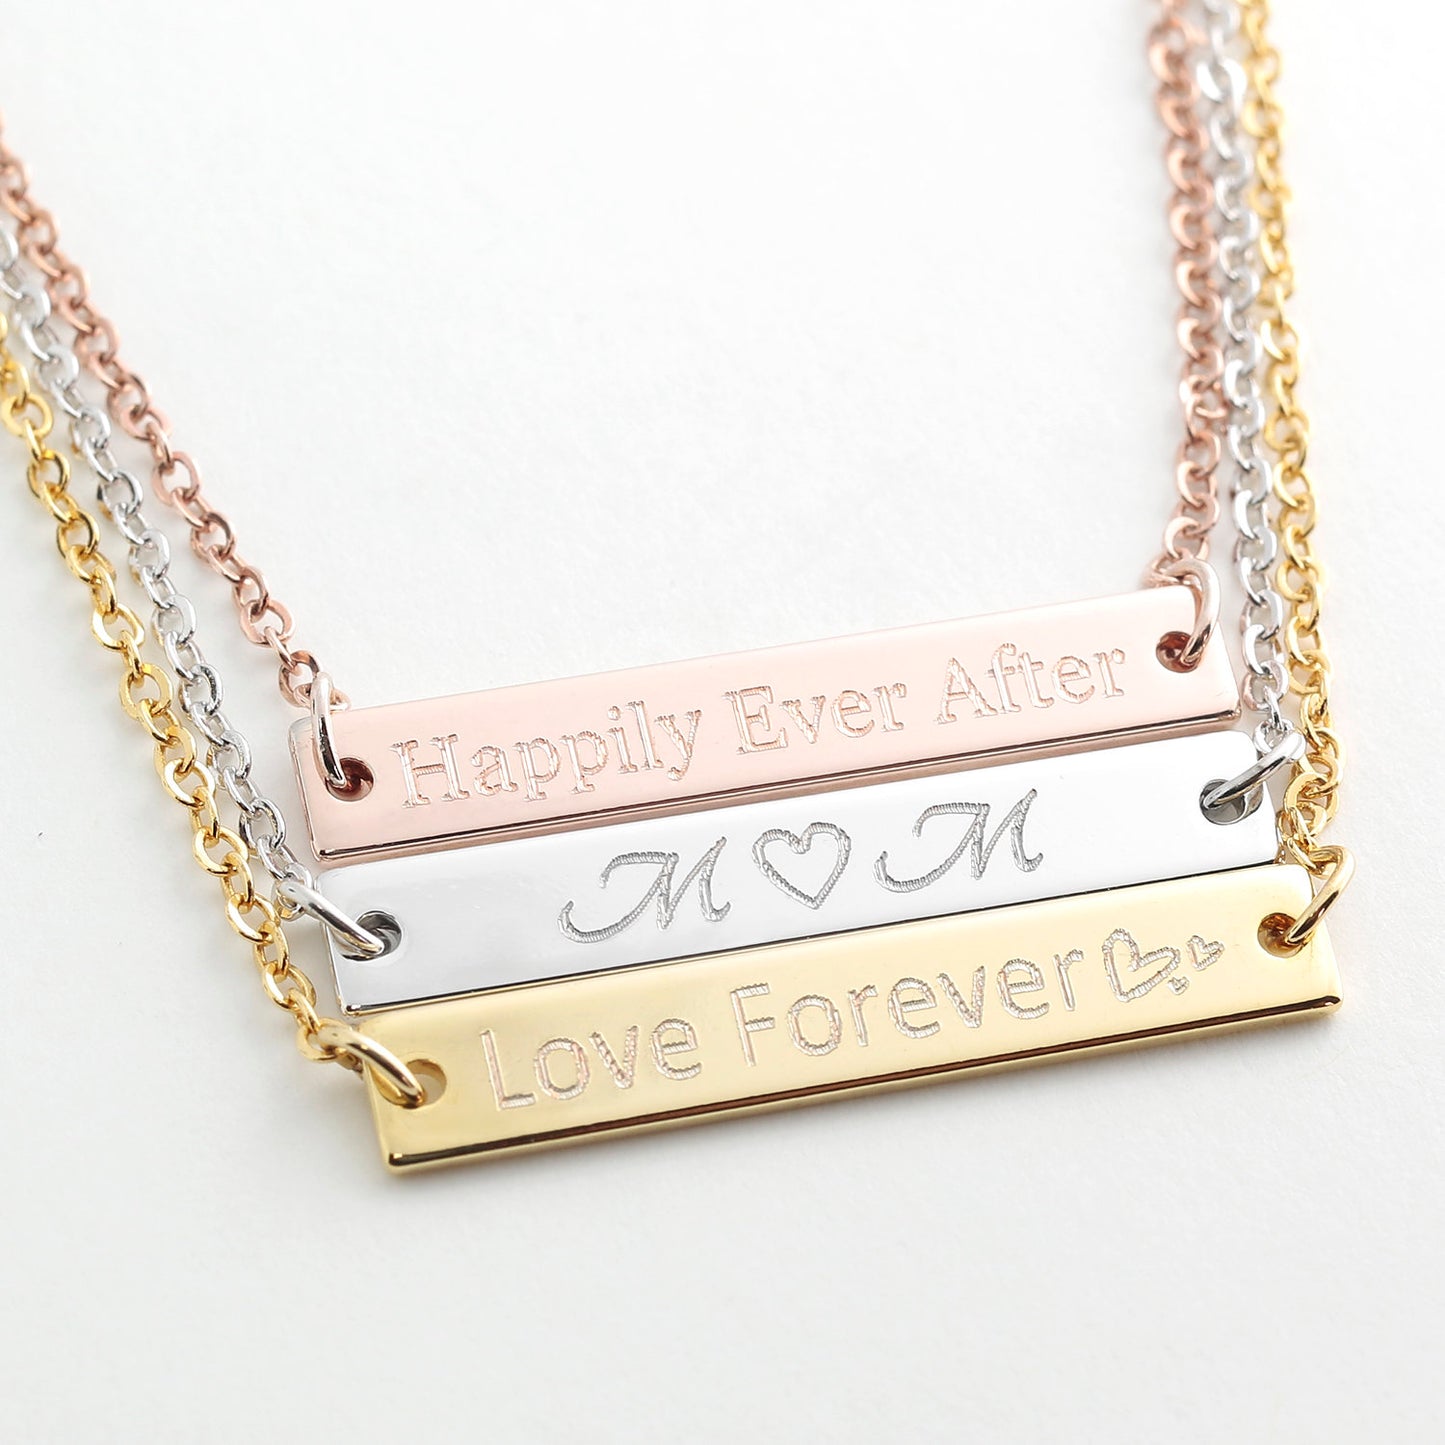 Personalized Name necklace - Best gift for her